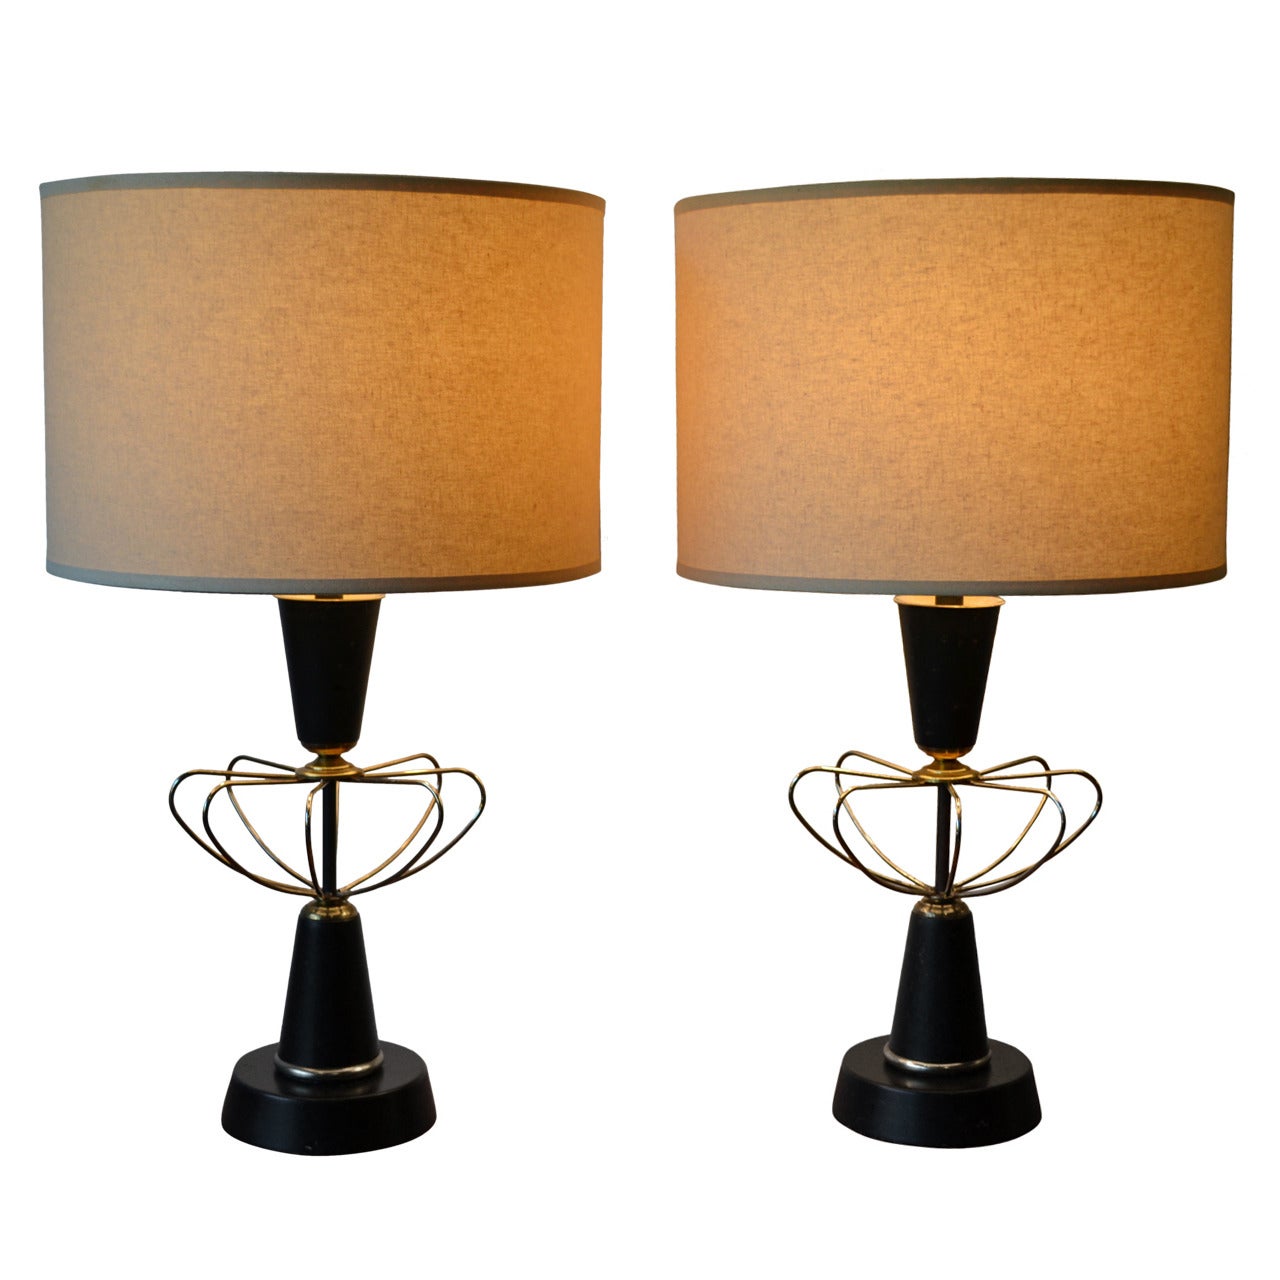 Atomic Age Table Lamps in the Manner of Paul McCobb